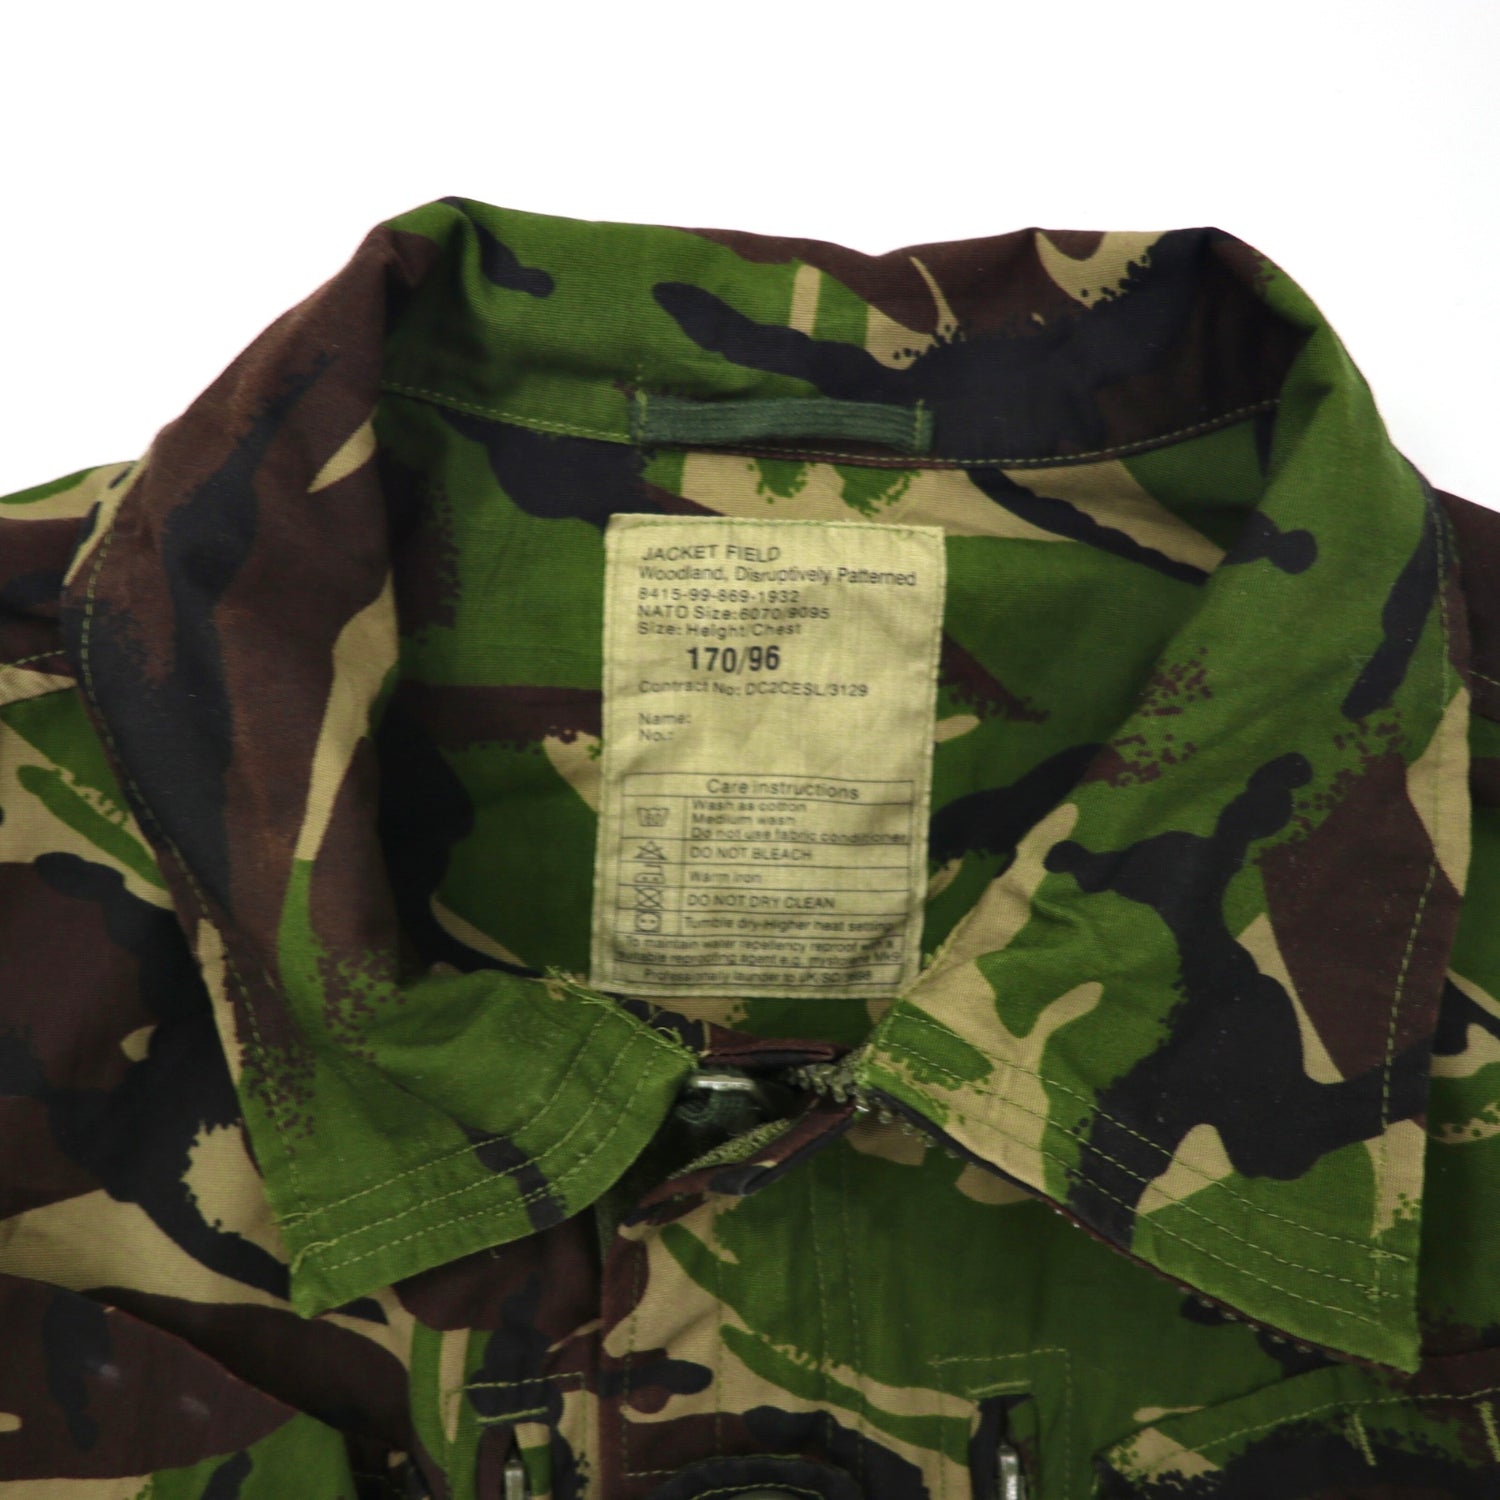 Field jacket 170/96 United Kingdom army 90's Camouflage patterned